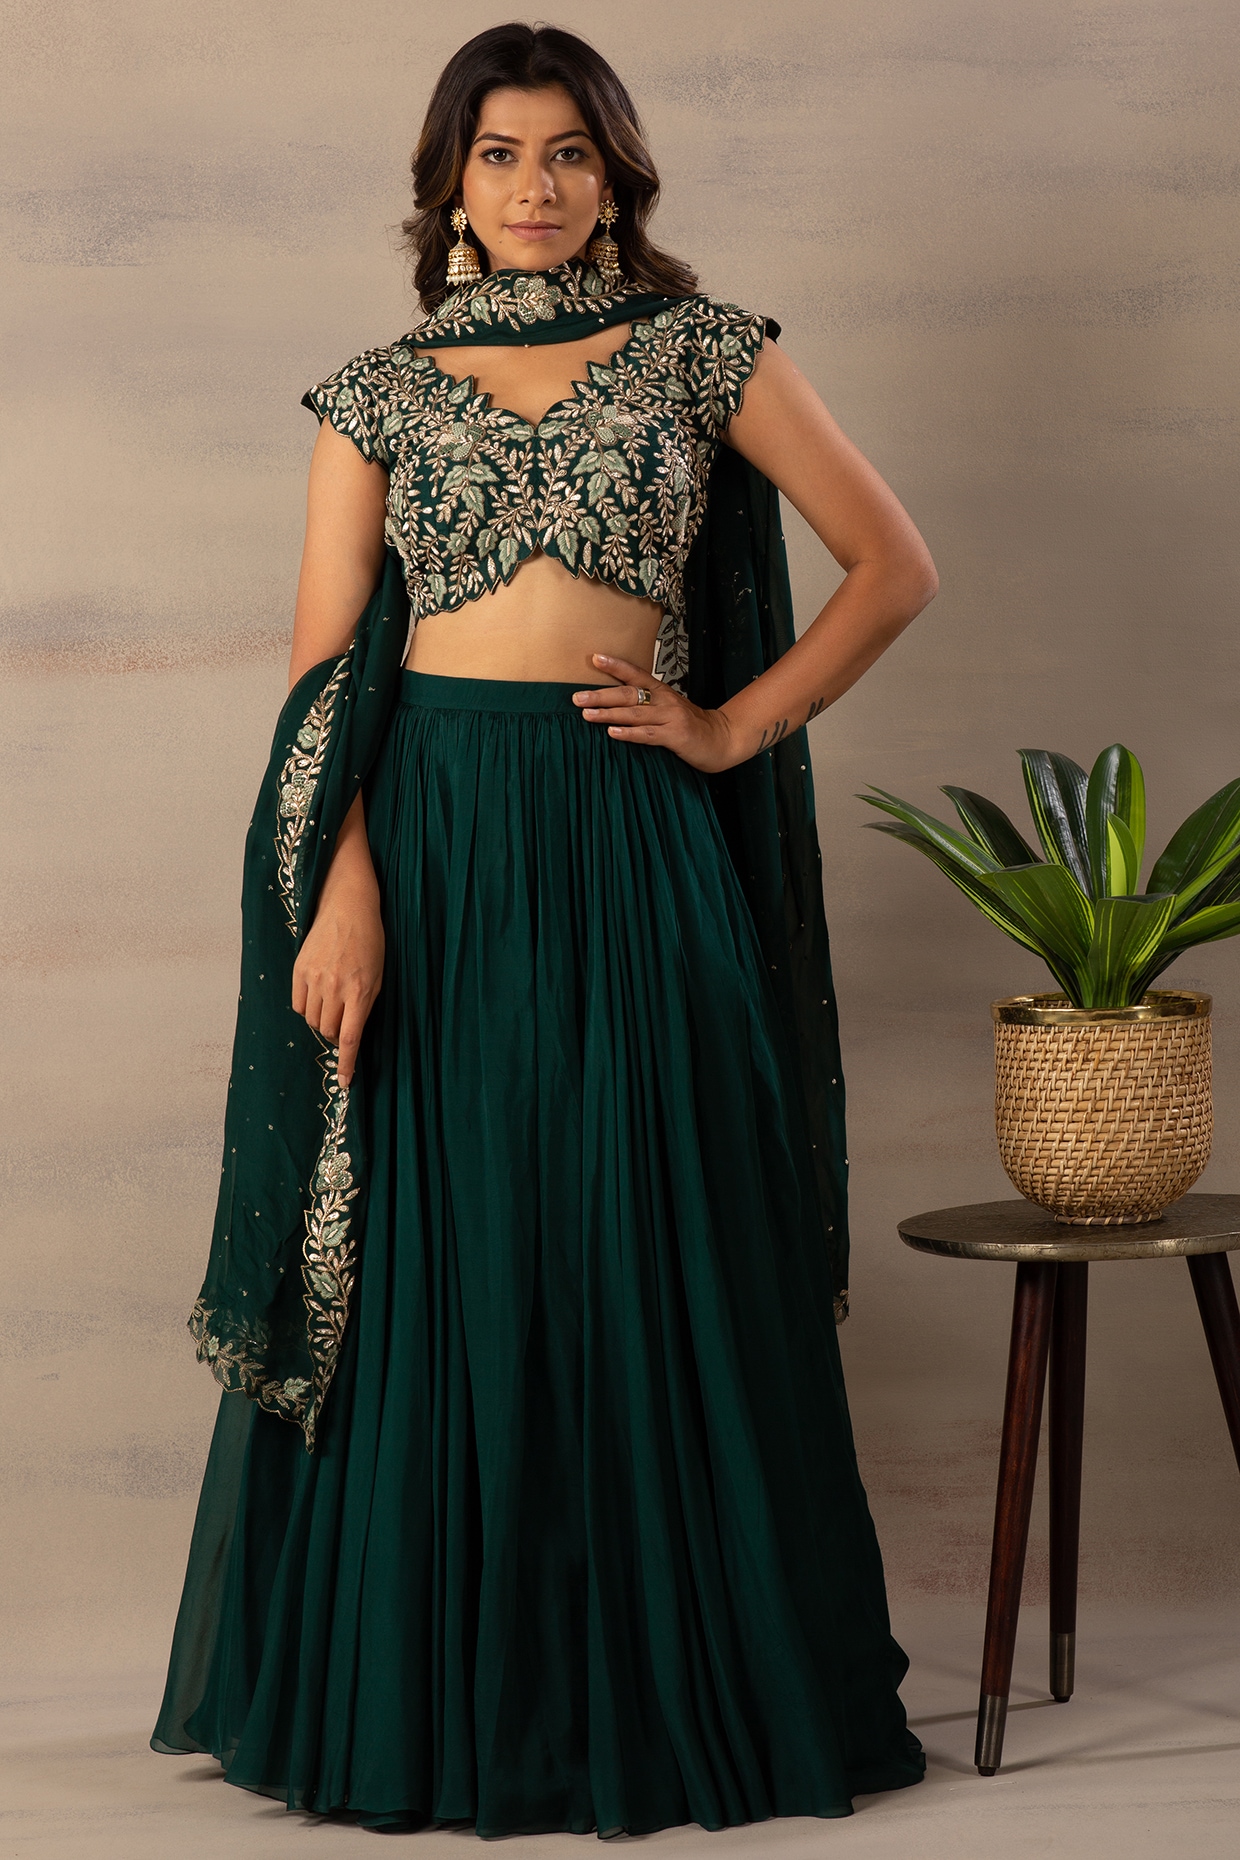 Dusty dark green Colour Embroidered Attractive Party Wear Silk Lehenga  choli has a Regular-fit and is Made From High-Grade Fabrics And Yarn.